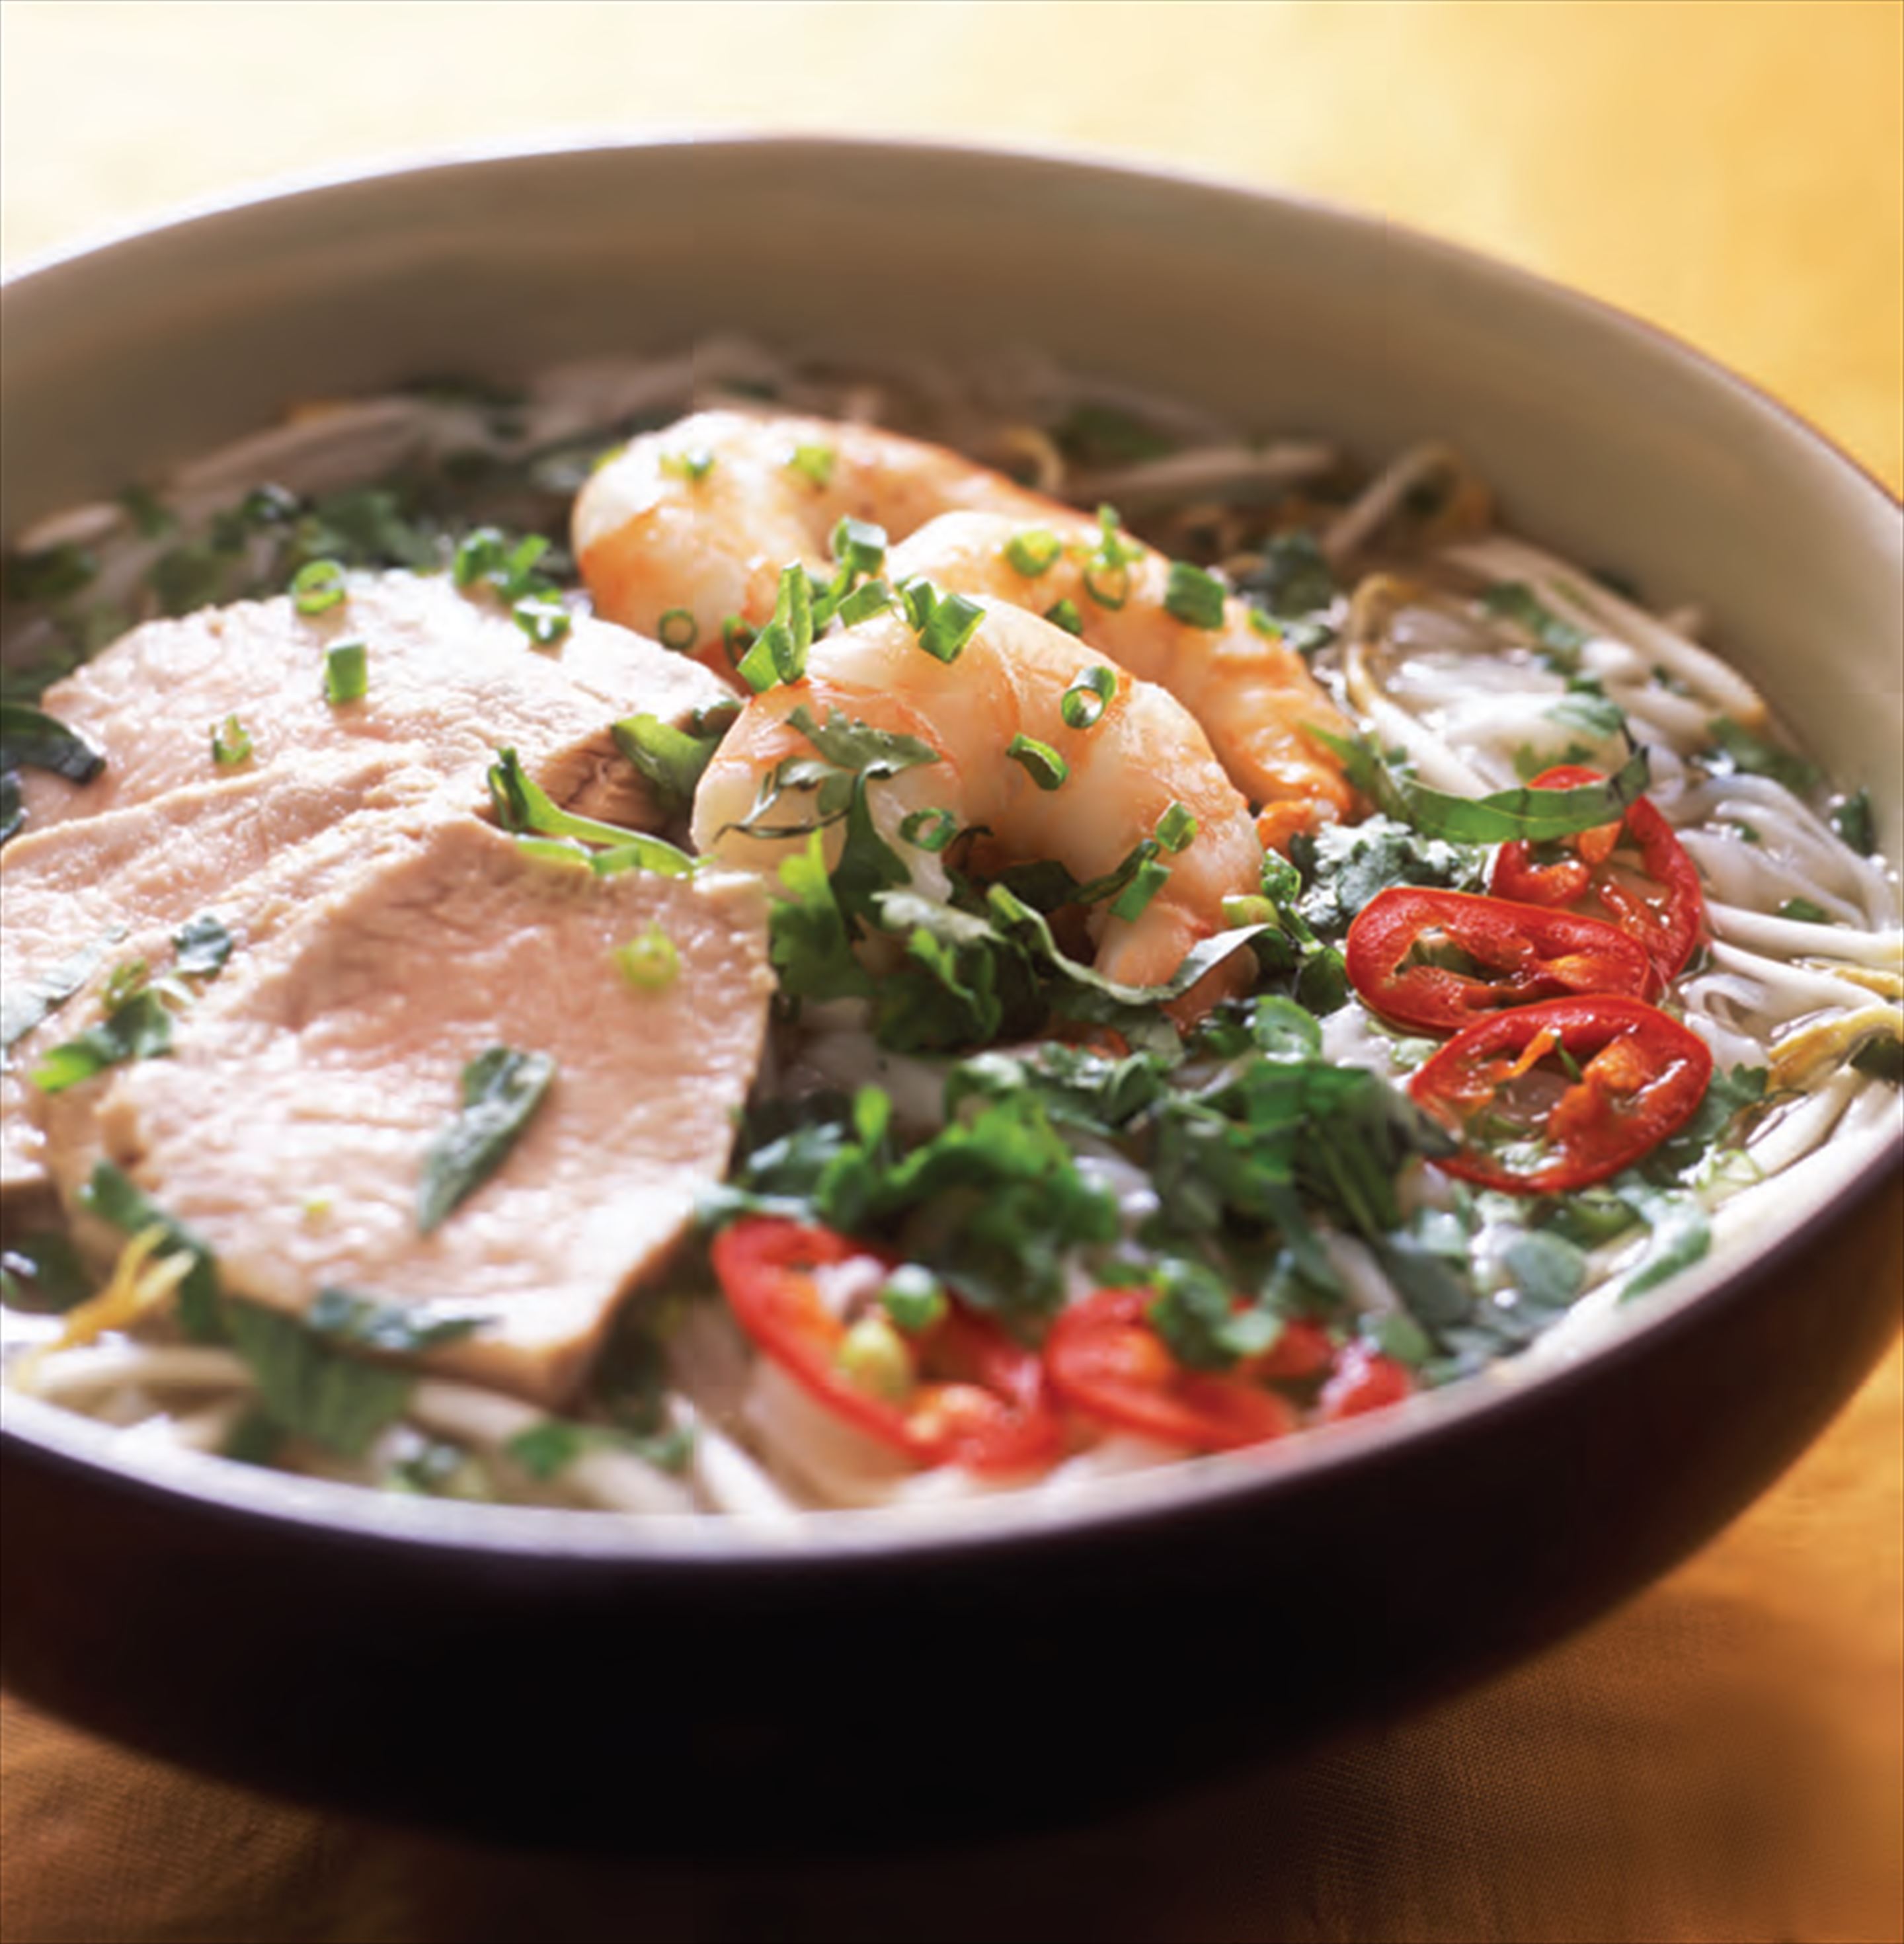 Prawn and pork broth with rice noodles